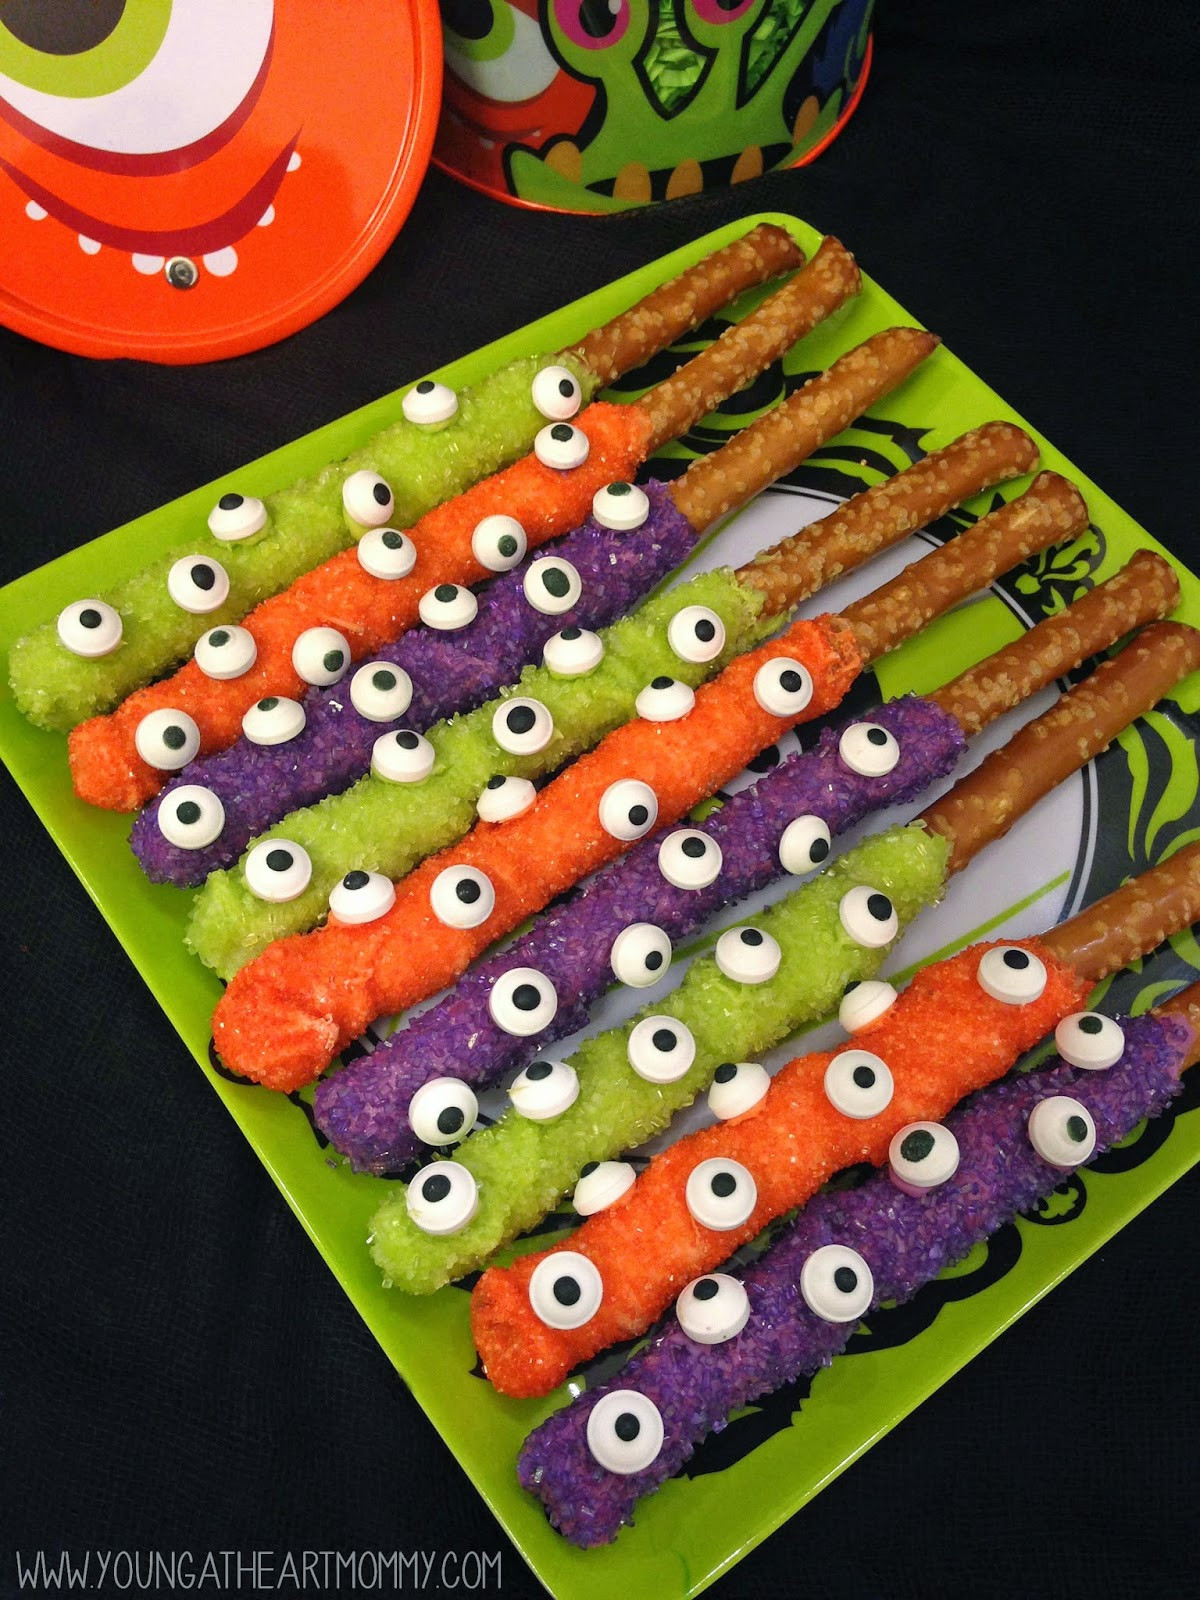 Chocolate Dipped Pretzels For Halloween
 Young At Heart Mommy Eerie Eyeball Pretzel Rods